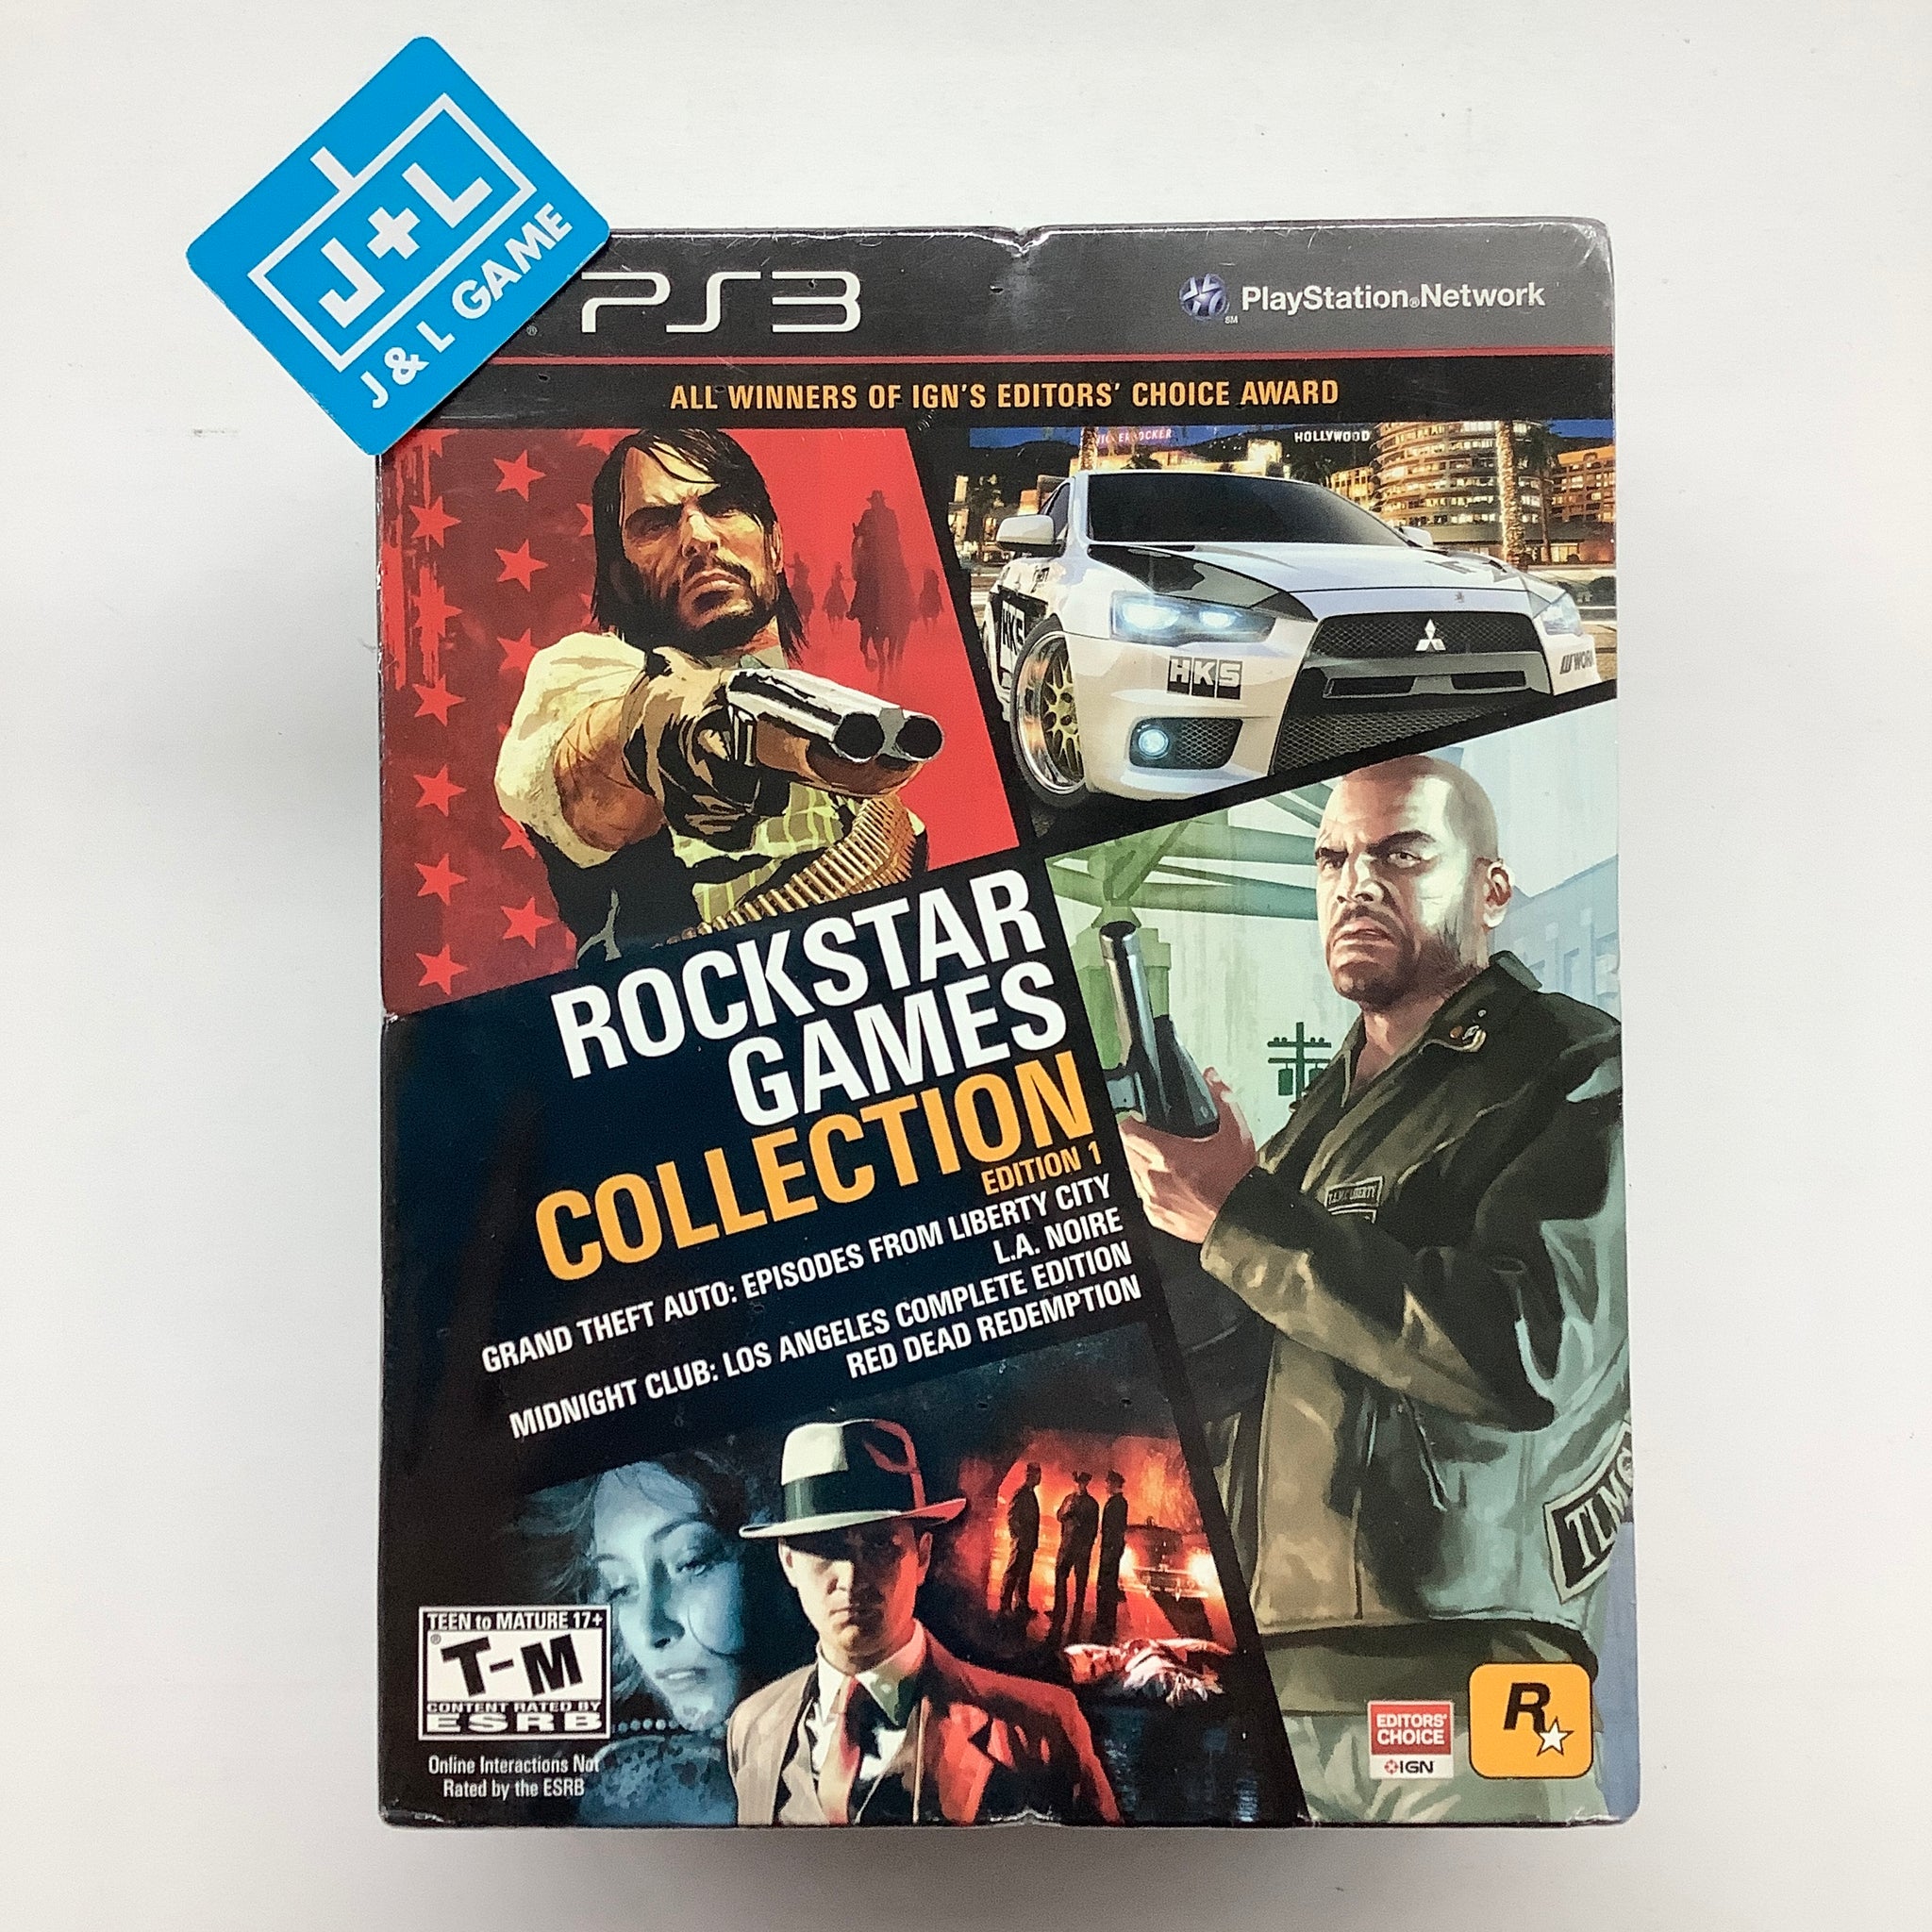 Grand Theft Auto IV GTA4 SPECIAL COLLECTORS EDITION Playstation3 PS3